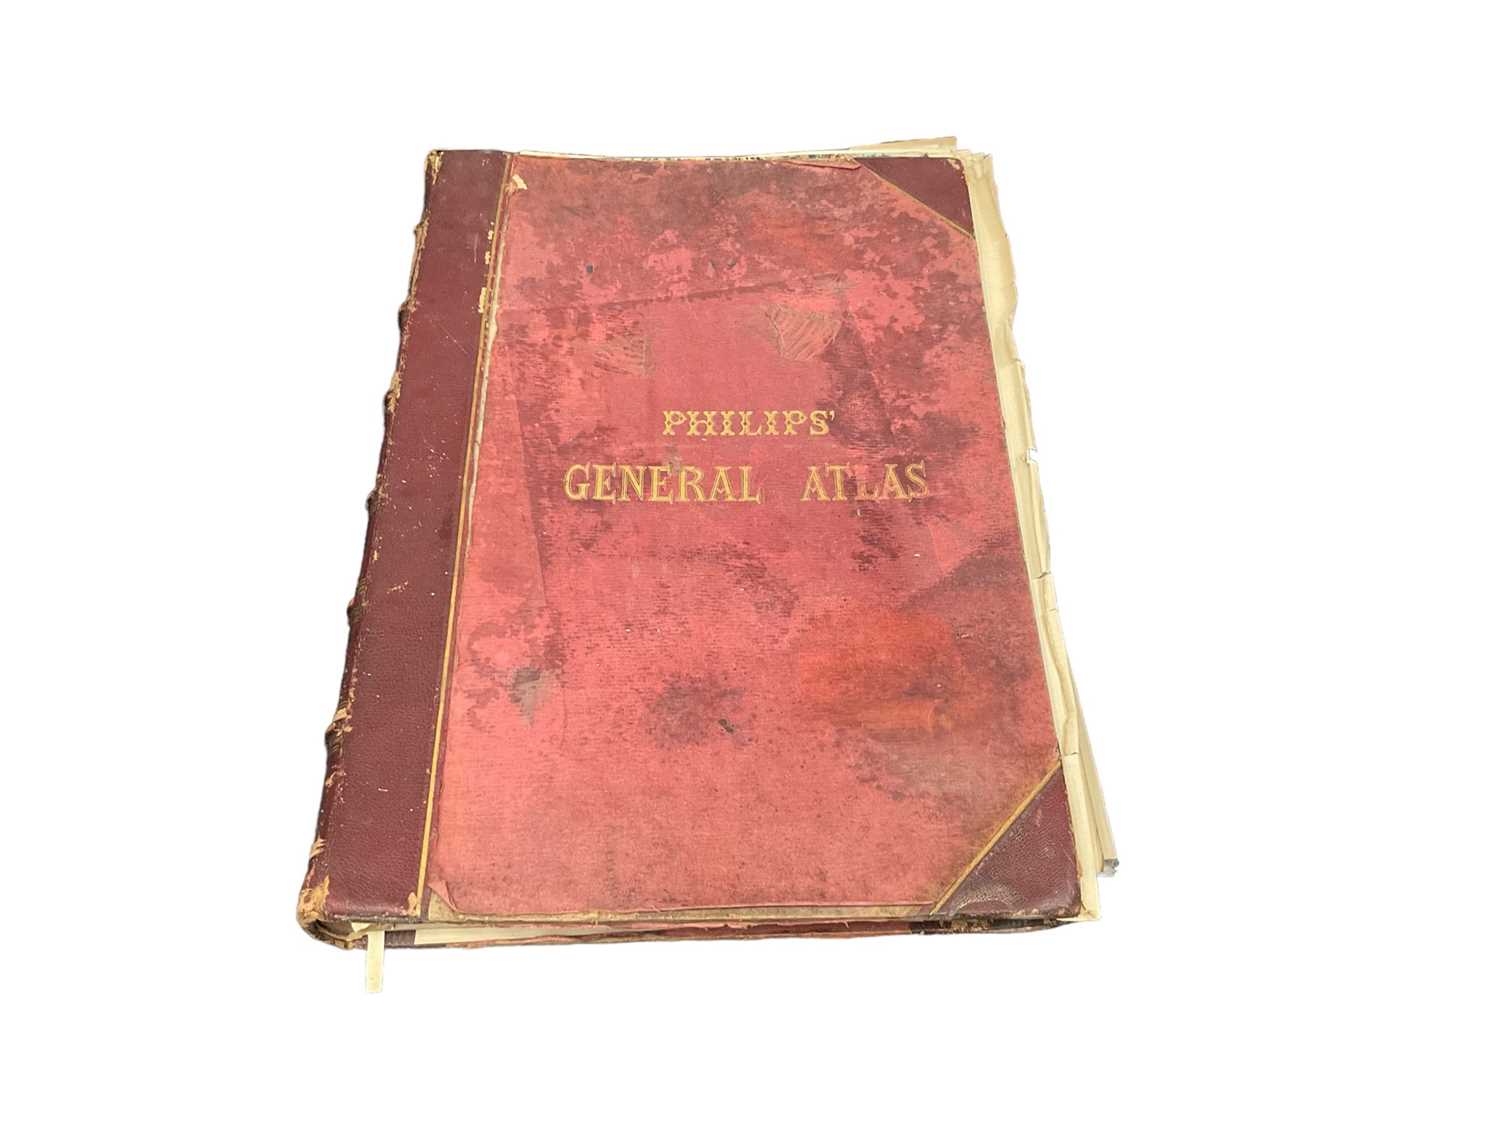 1862 Philips World Atlas, contents detached and possibly not complete, housing a large collection of